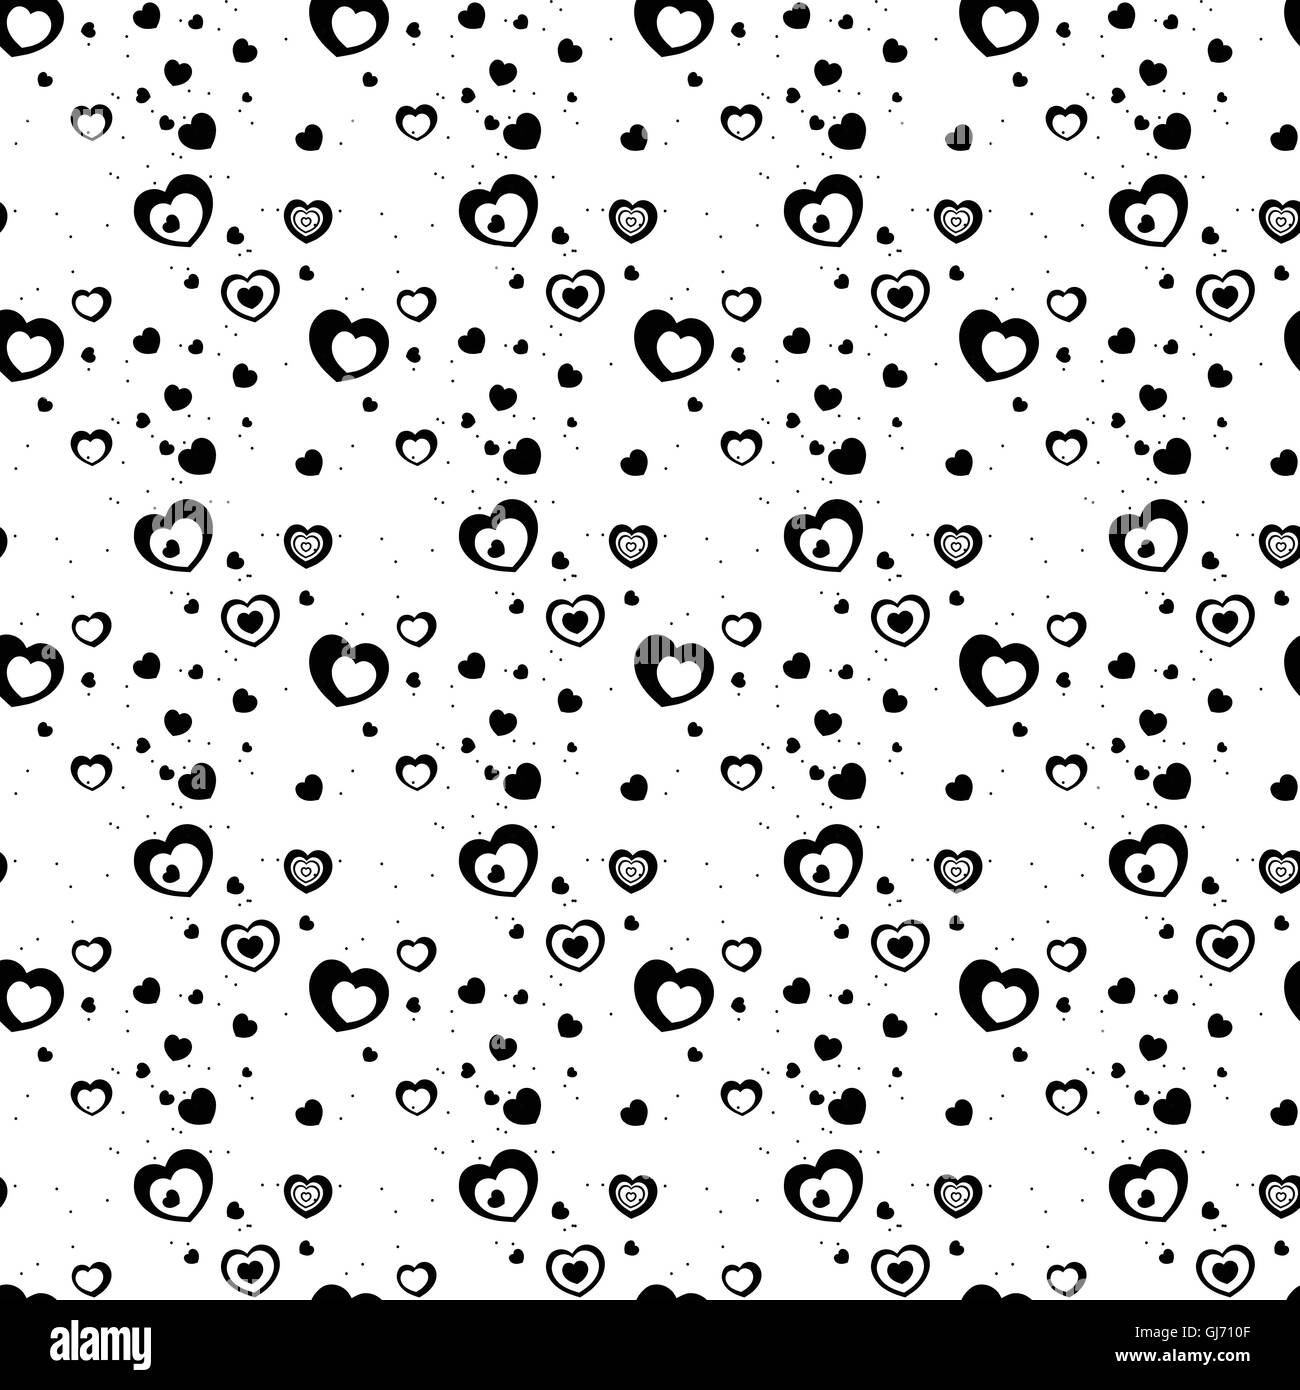 Seamless stylish pattern with black hearts. Vector illustration Stock Vector